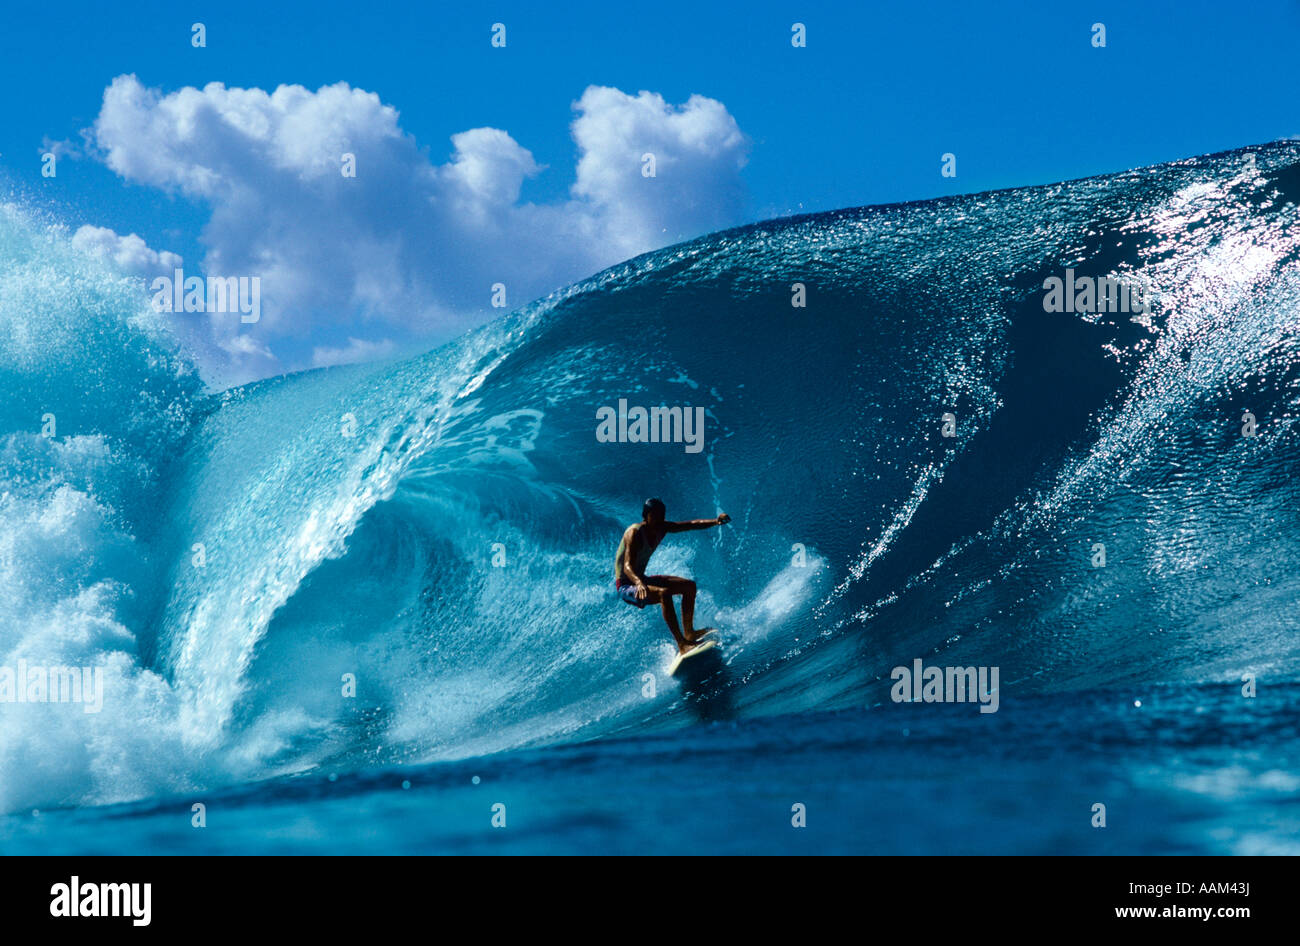 1980s Surfer Surfing On Surfboard Hi Res Stock Photography And Images Alamy